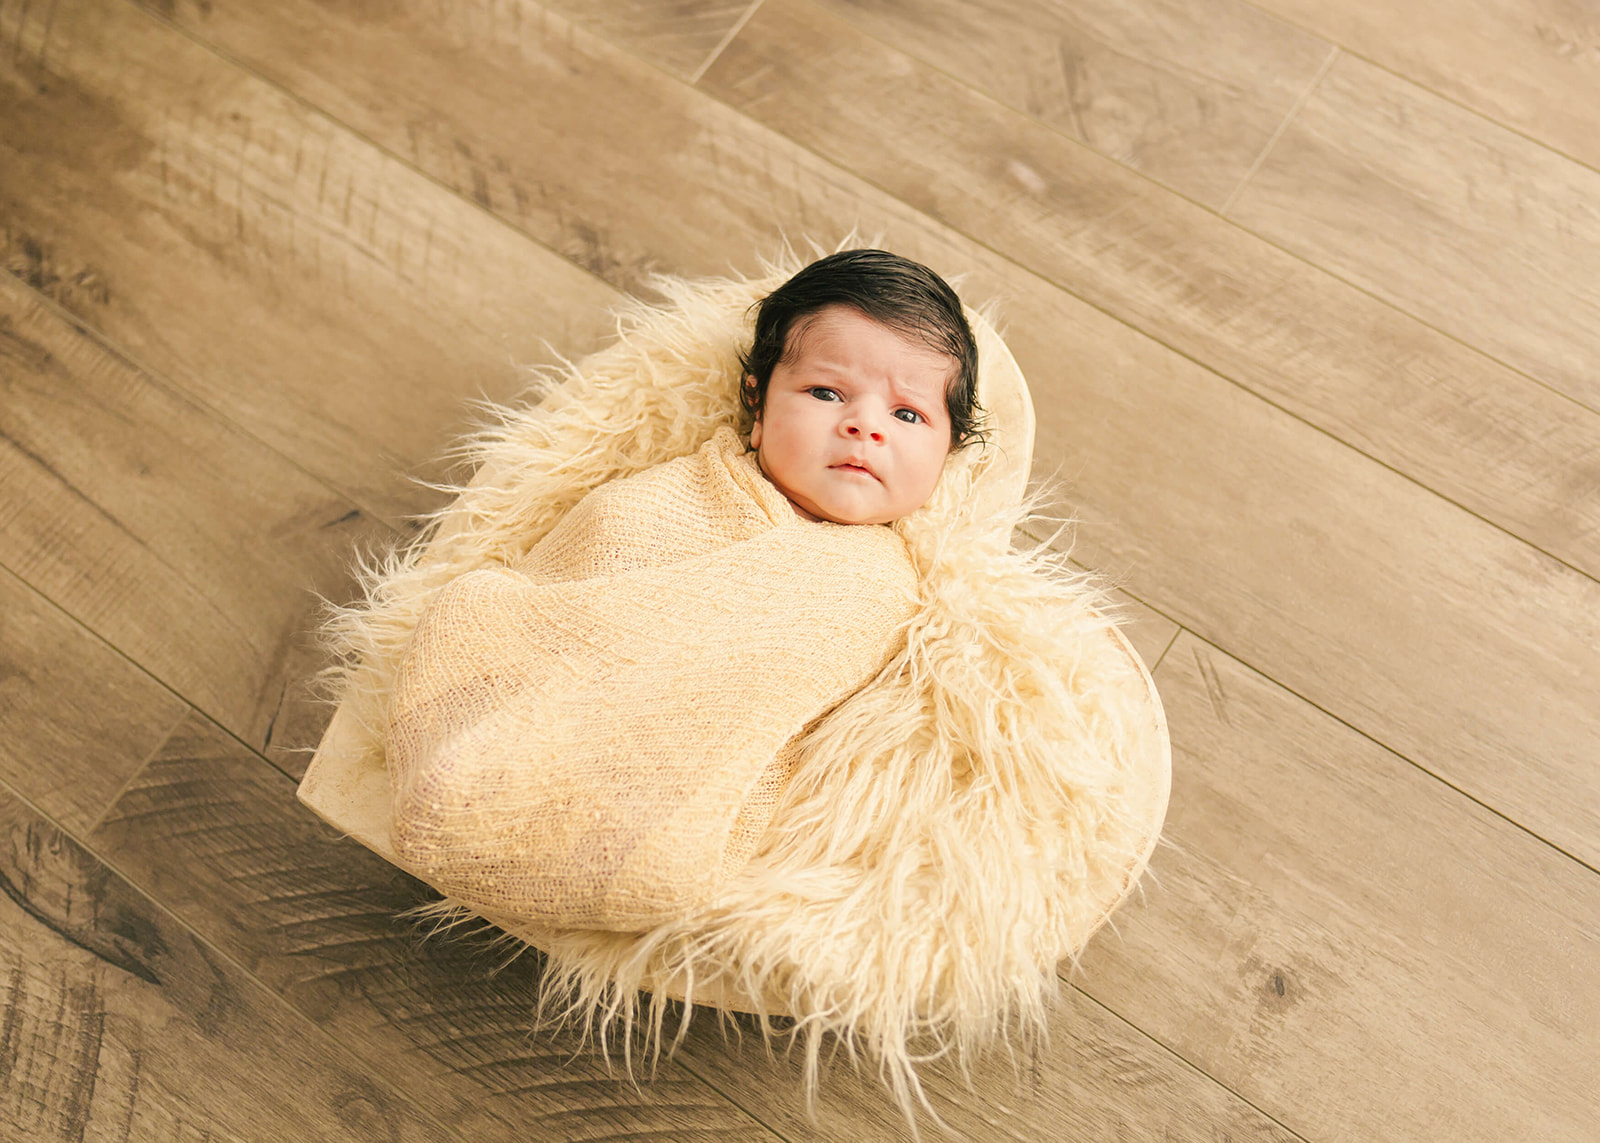 newborn baby in yellow wrap laying in a heart orange county pediatricians